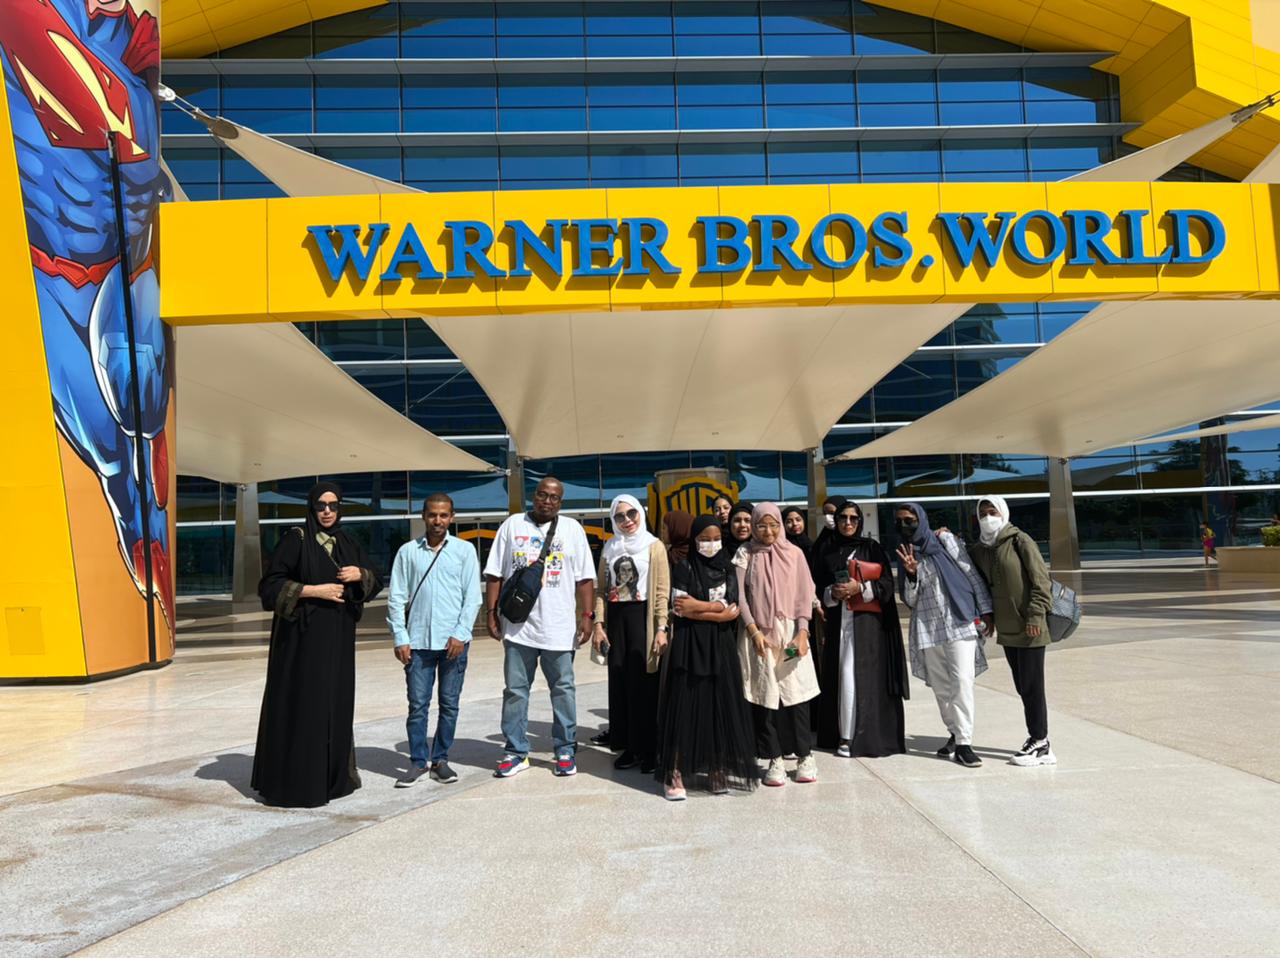 An entertaining trip for Thalassemia heroes to (warner brothers),World